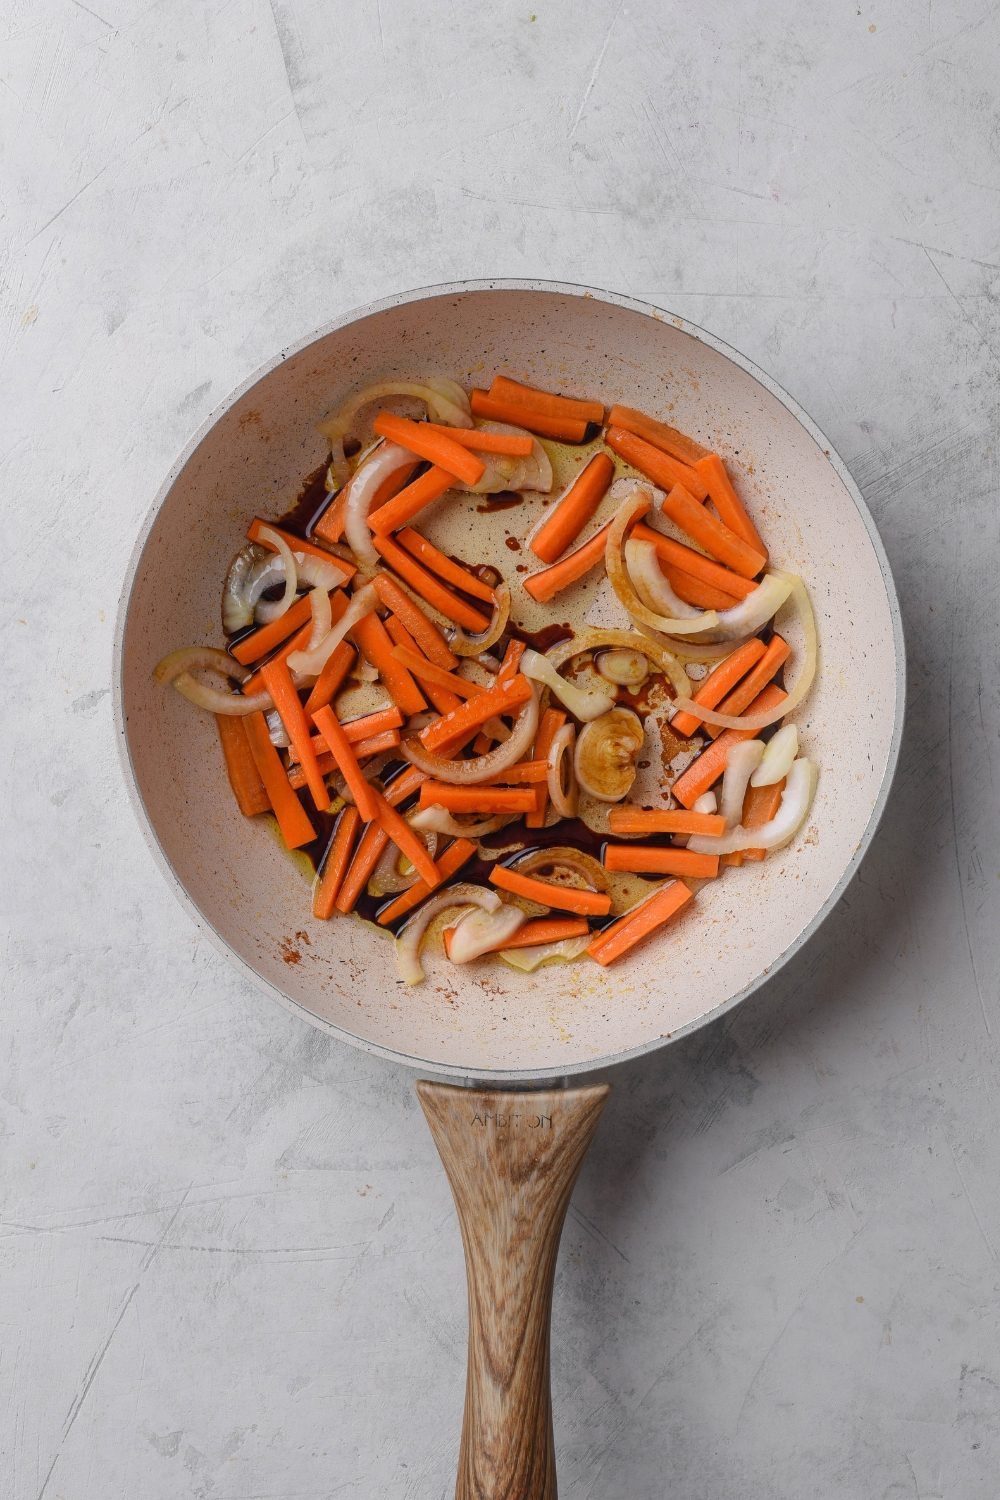 A frying pan with carrots and onions cooking.